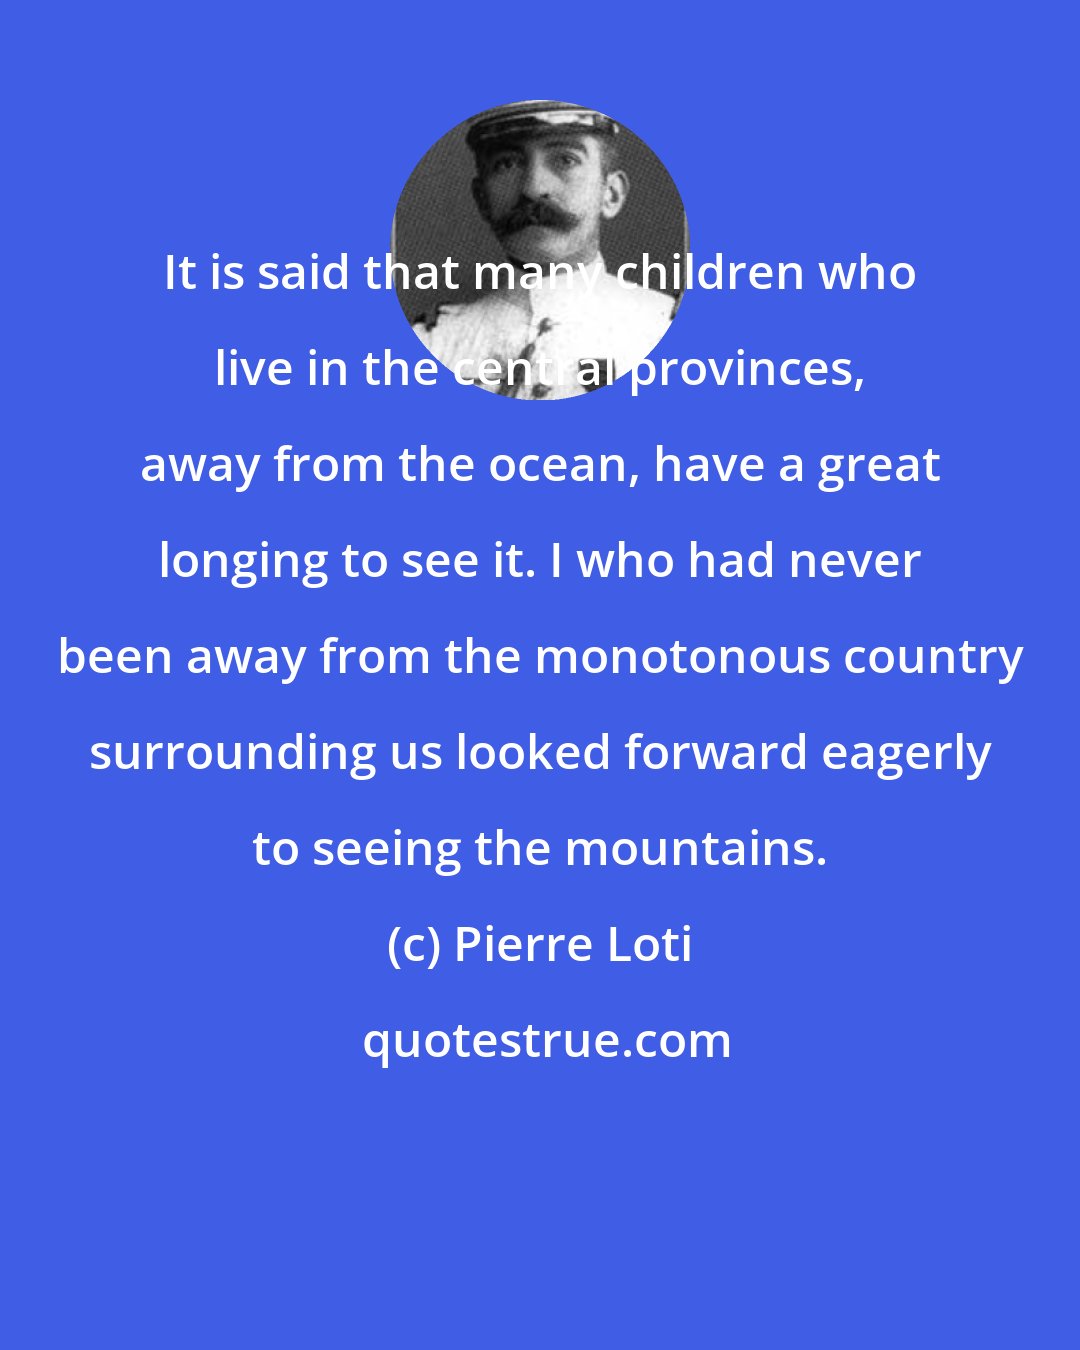 Pierre Loti: It is said that many children who live in the central provinces, away from the ocean, have a great longing to see it. I who had never been away from the monotonous country surrounding us looked forward eagerly to seeing the mountains.